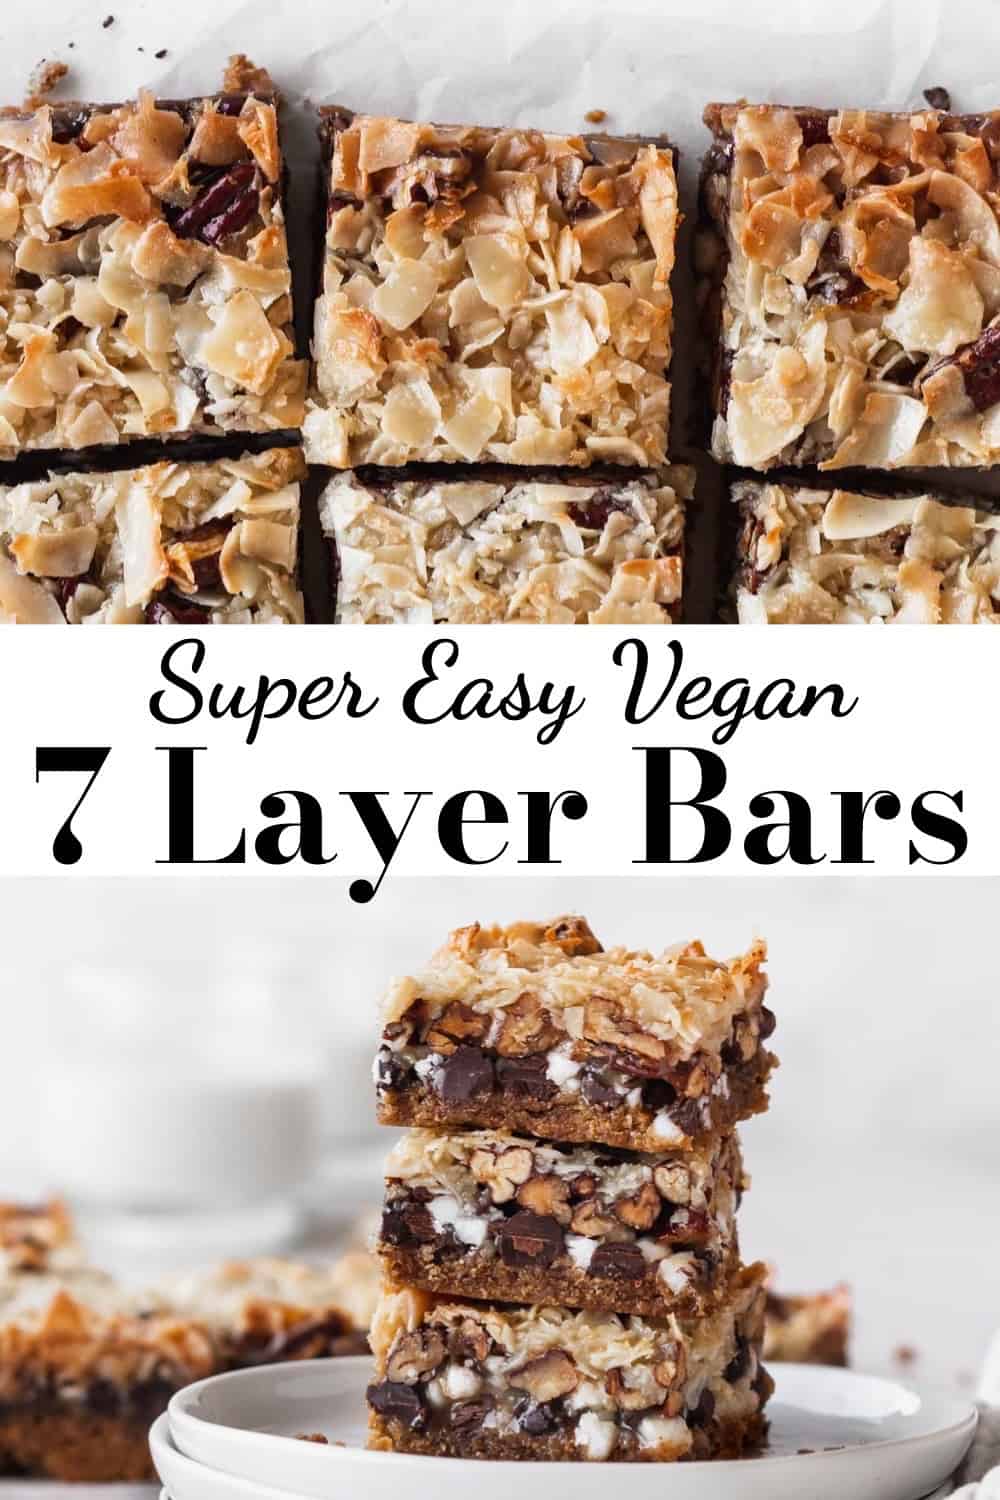 Vegan 7 layer bars on a plate.